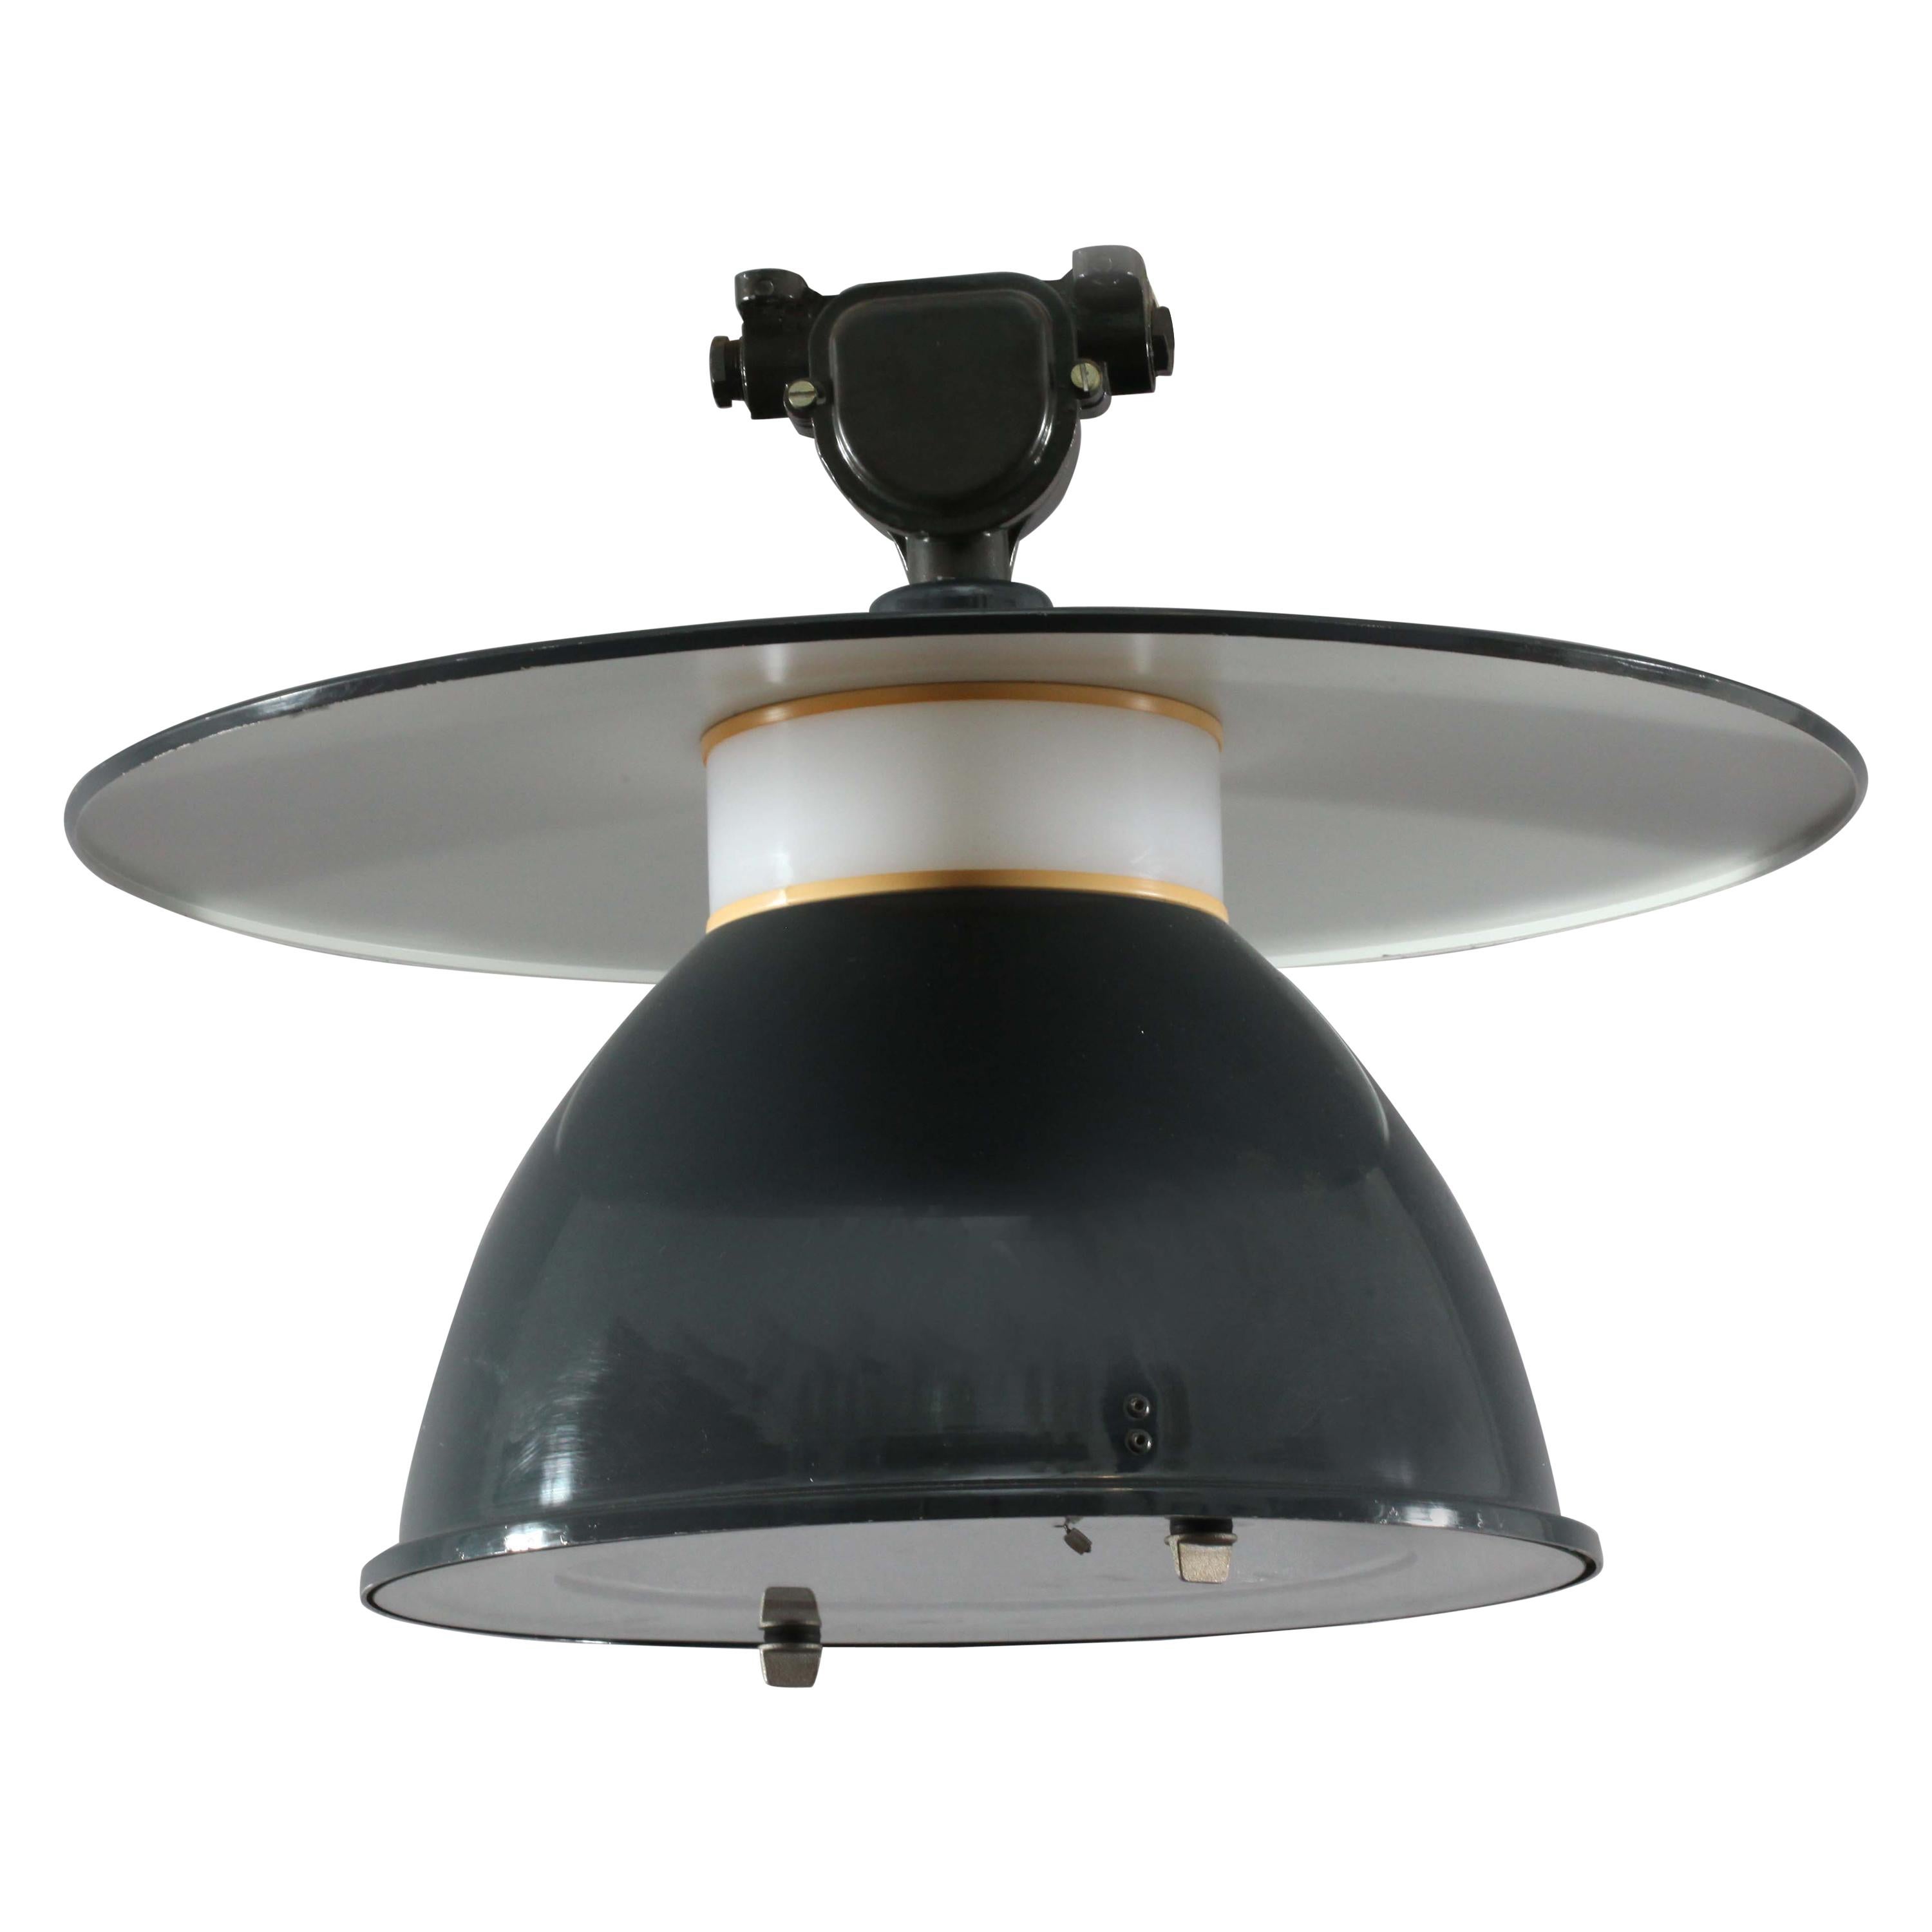 High Quality Enameled Industrial Ceiling Lamp, Germany, 1940